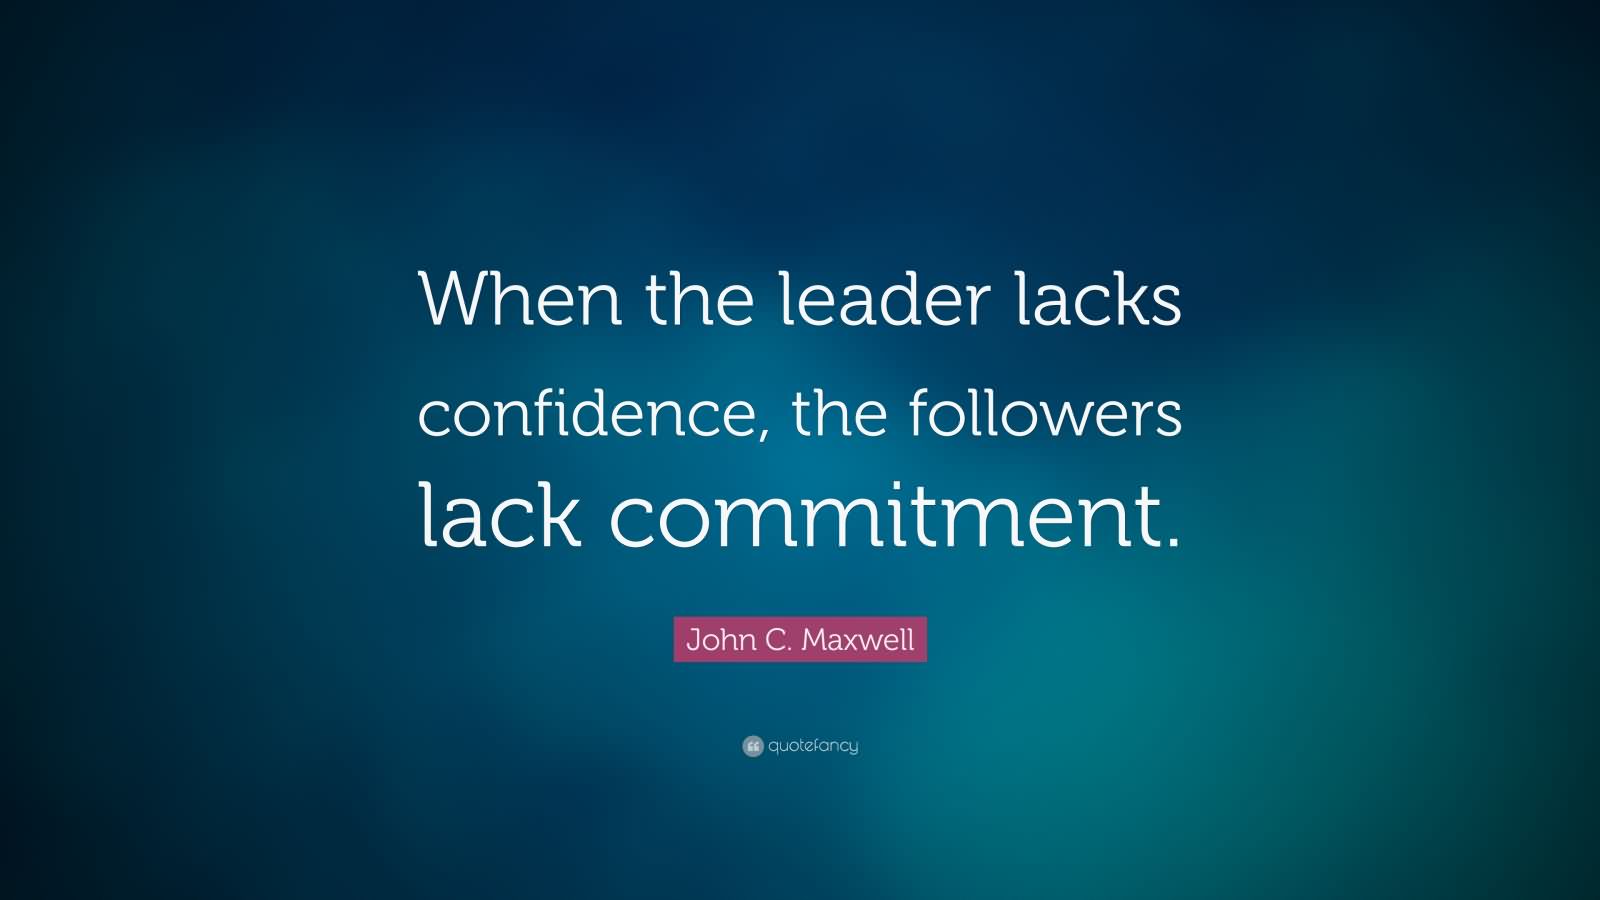 When the leader lacks confidence, the followers lack commitment - John C. Maxwell